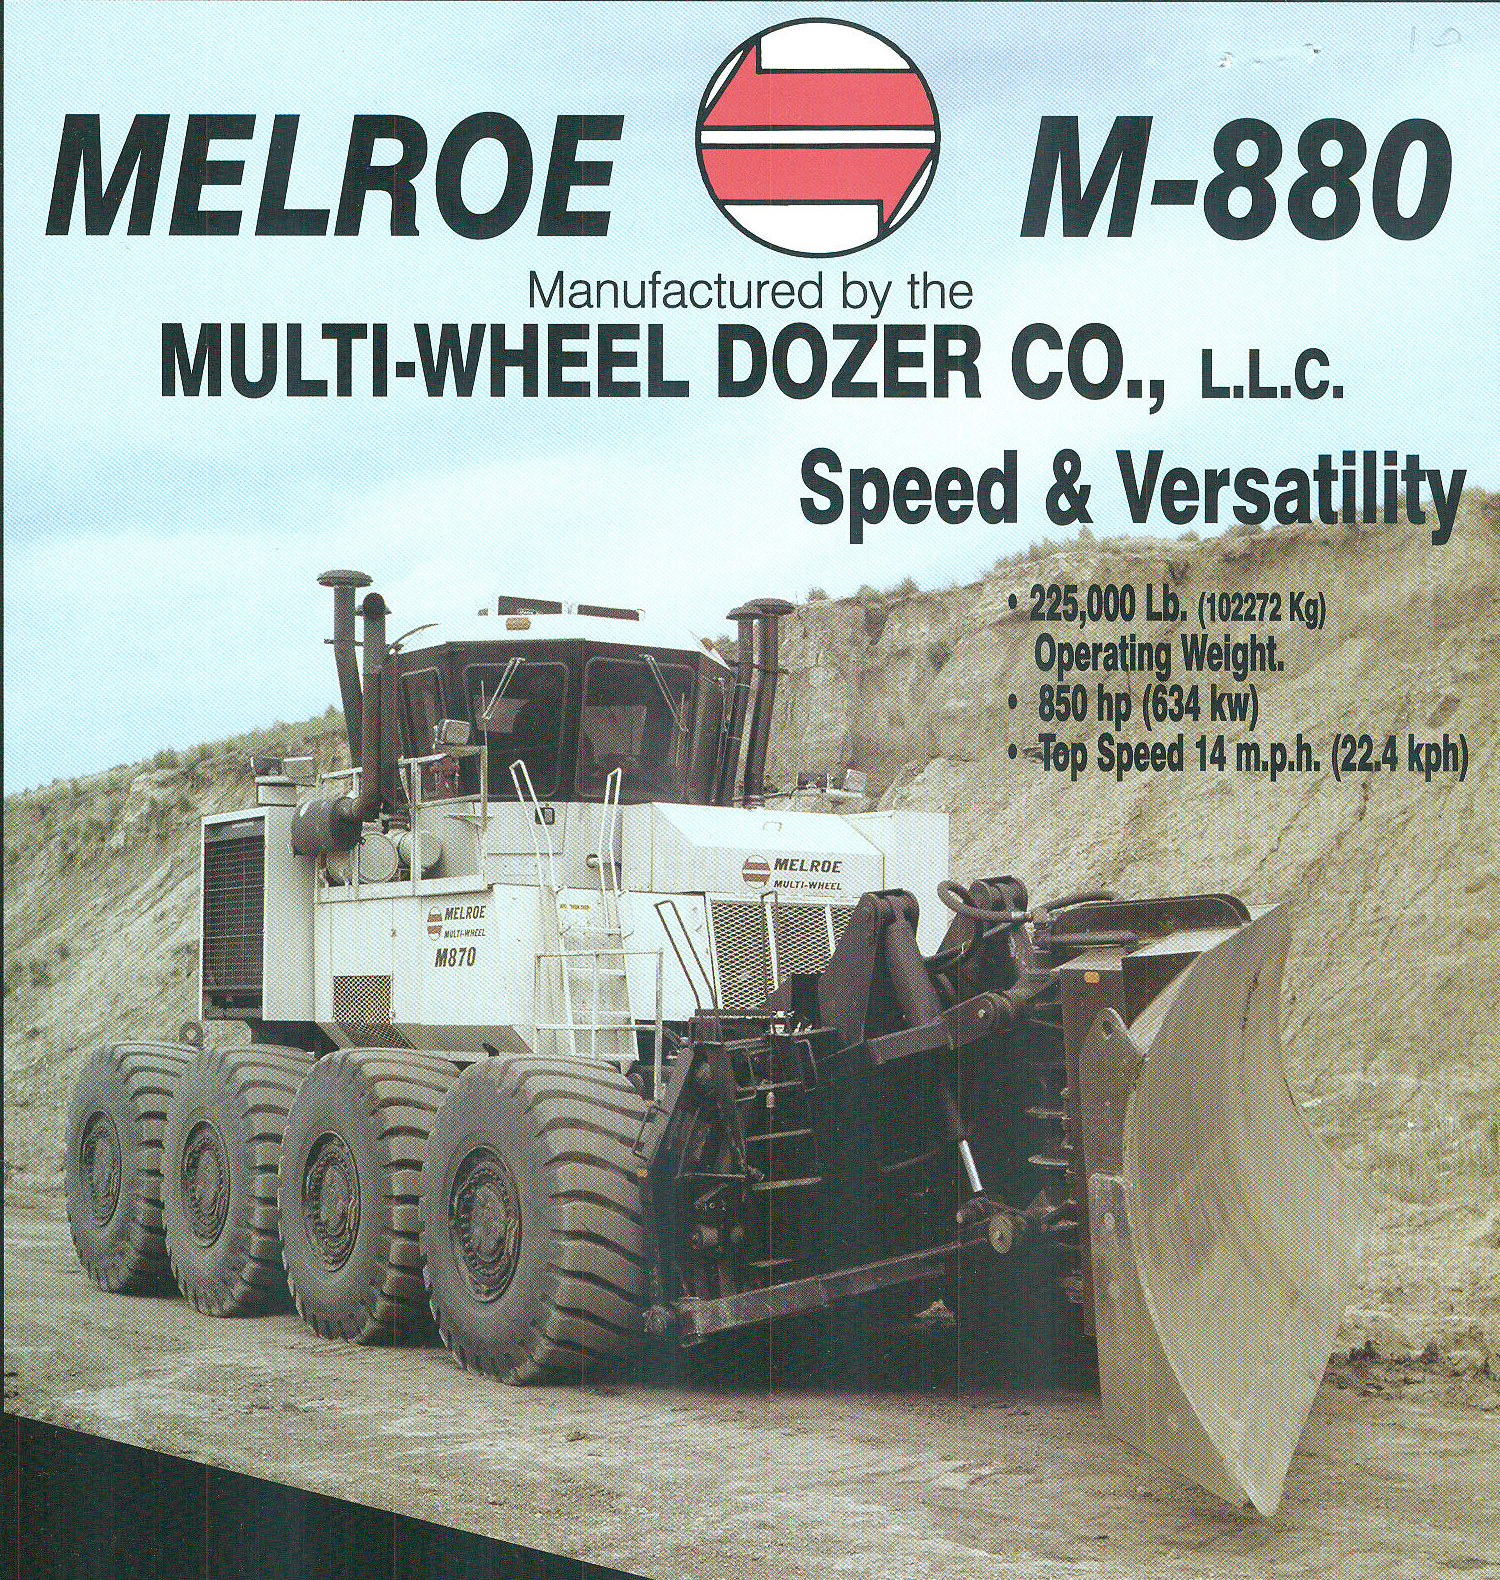 Melroe Manufacturing Company Multiscan0387_edited-1